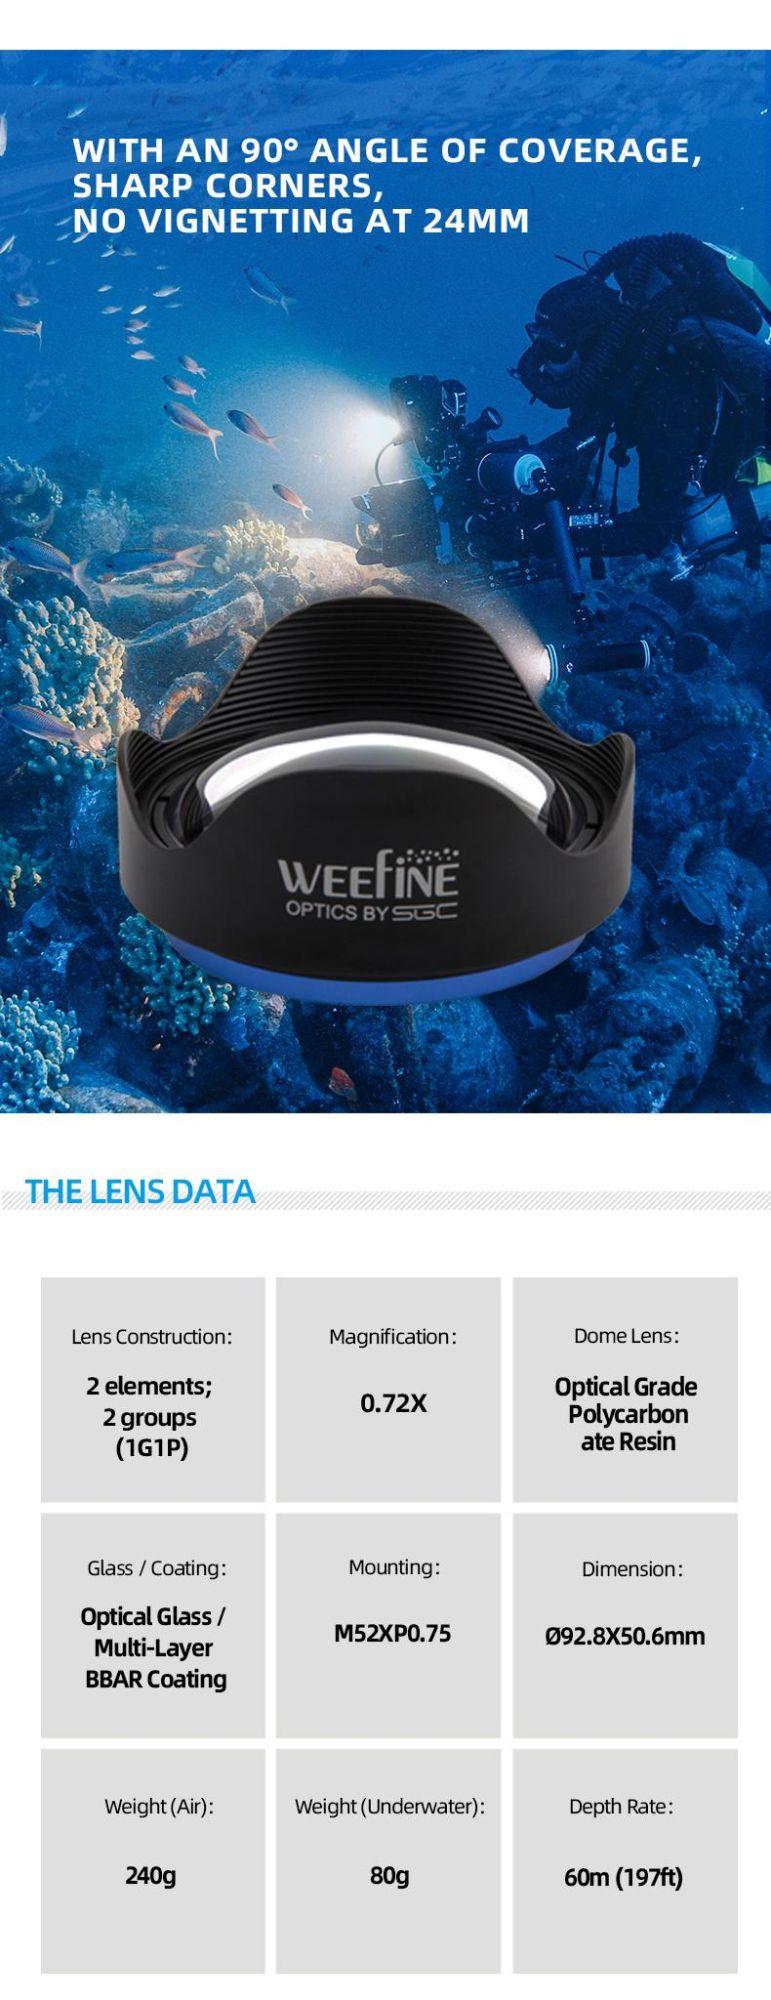 Wide-Angle Underwater Lens for Professional Diving Use Olympus Cannon Nikon Sony Panasonic Camera